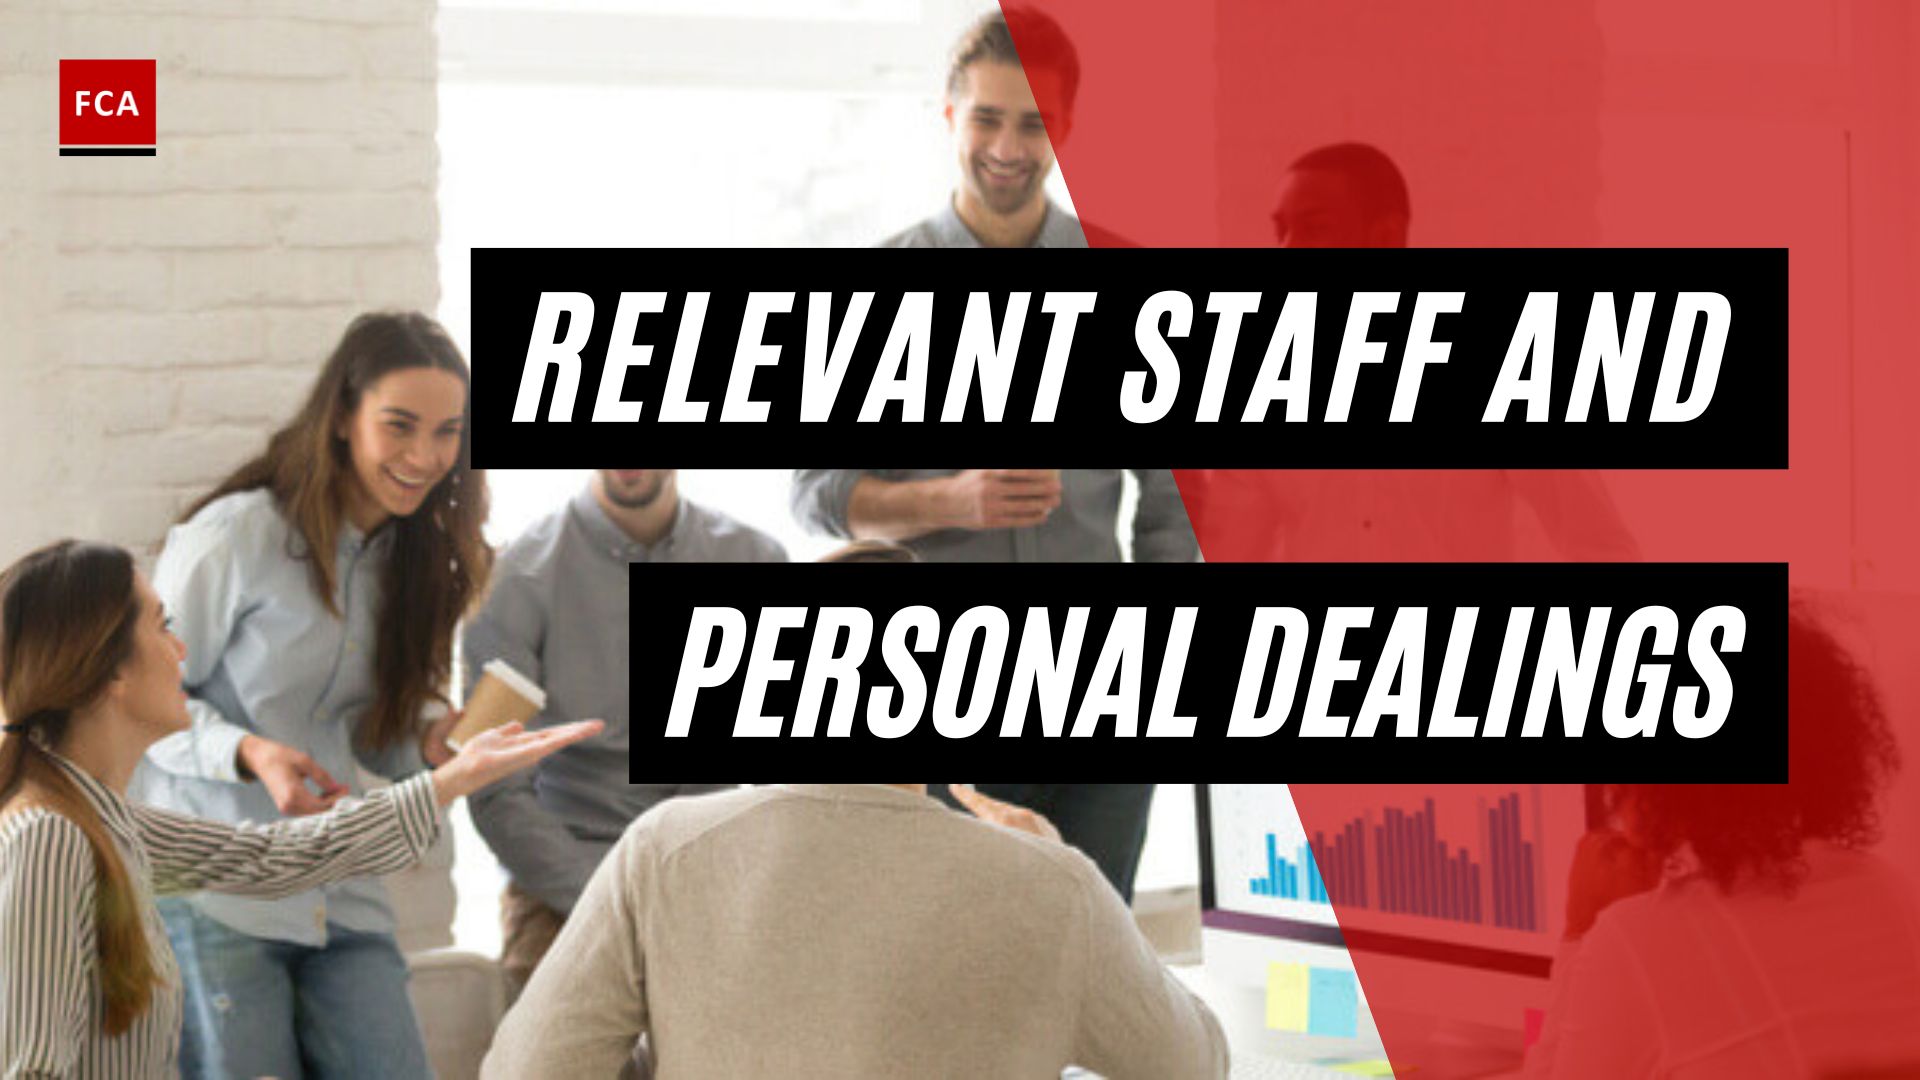 Relevant Staff And Personal Dealings